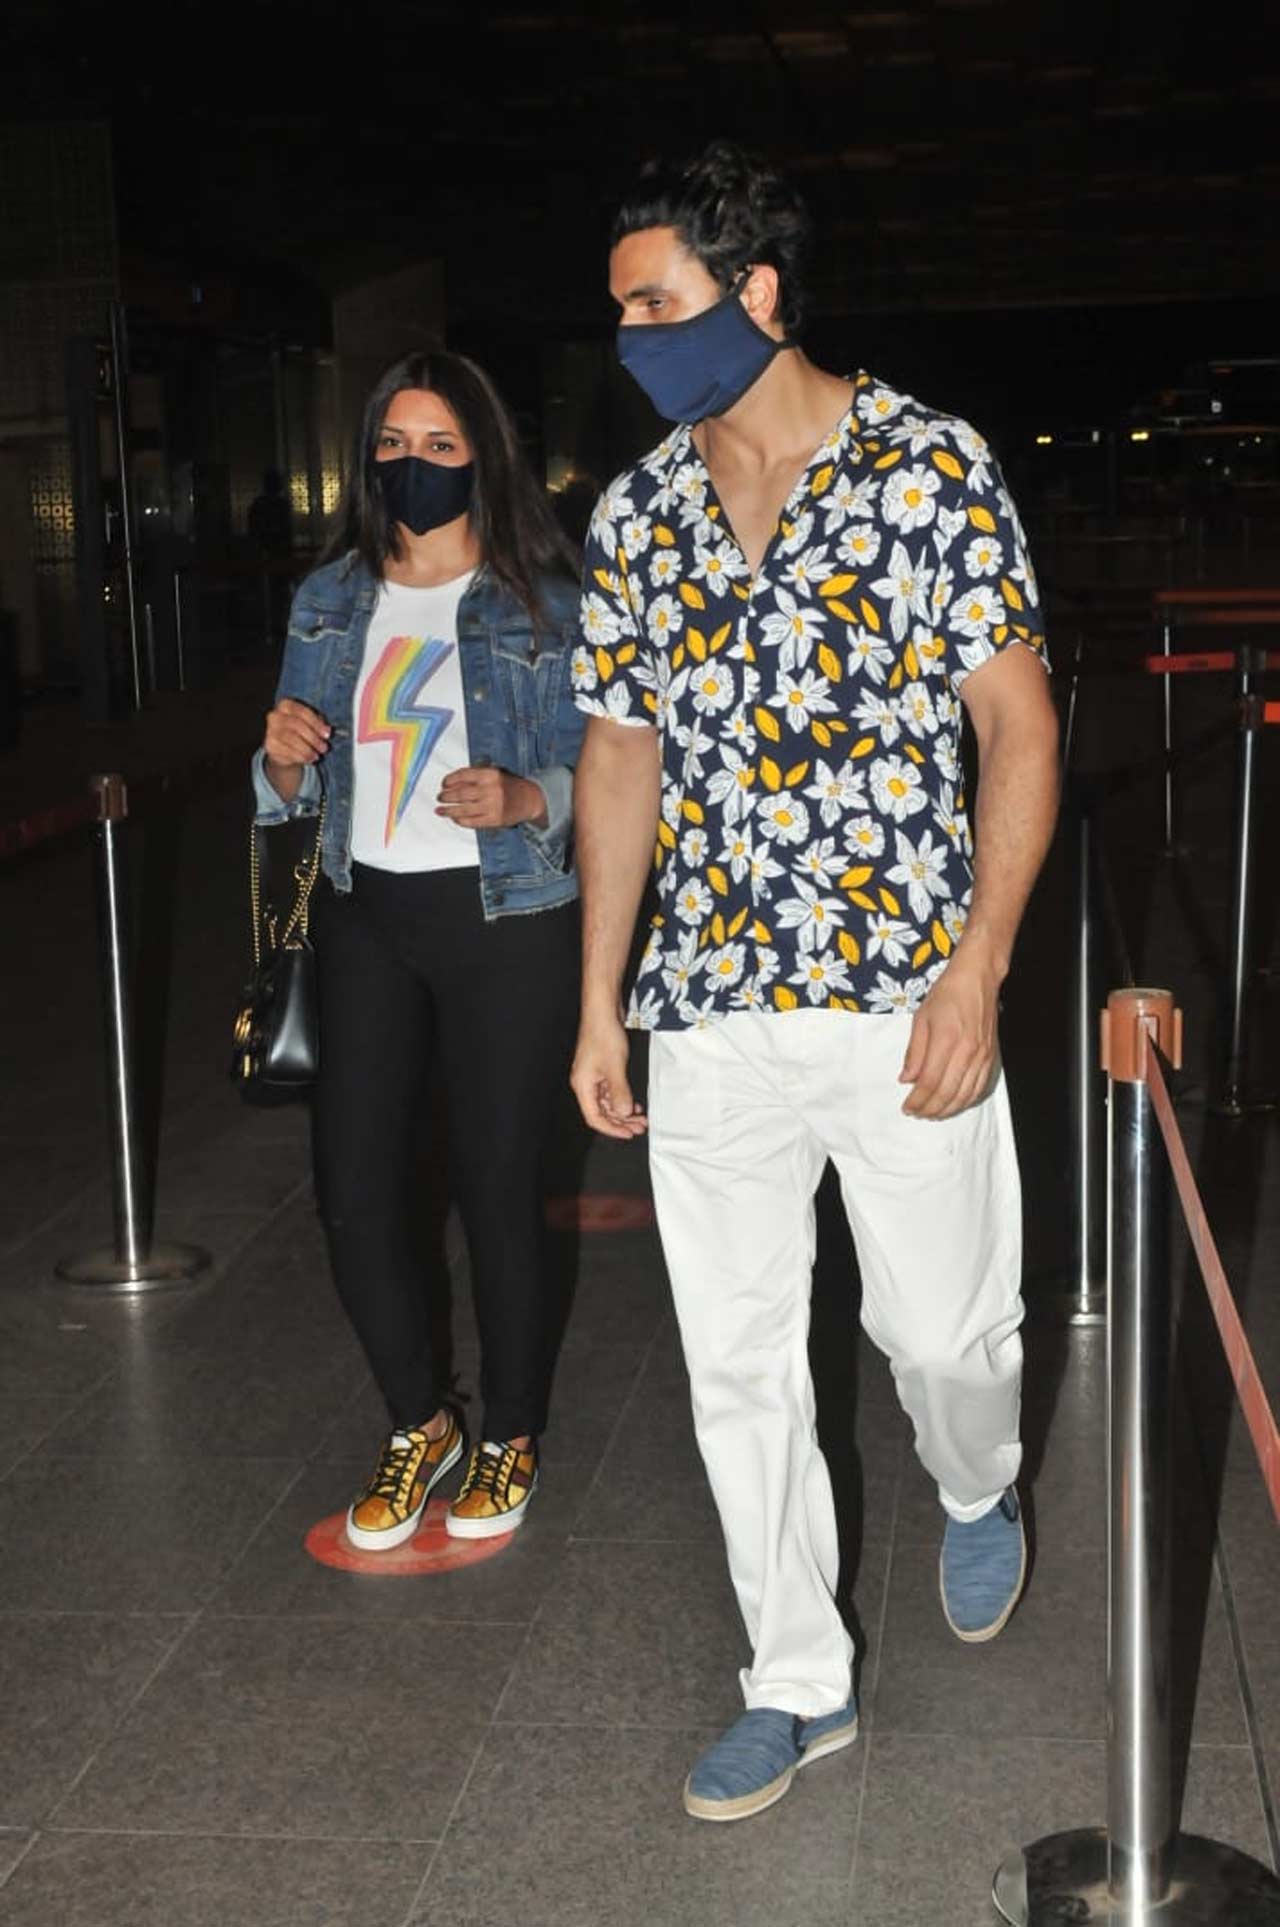 Divyanka Tripathi also reached Mumbai airport to see off her husband Vivek Dahiya, who is also a part of Khatron Ke Khiladi 11. The popular television actor sported a funky shirt, paired with white pants as his airport look.